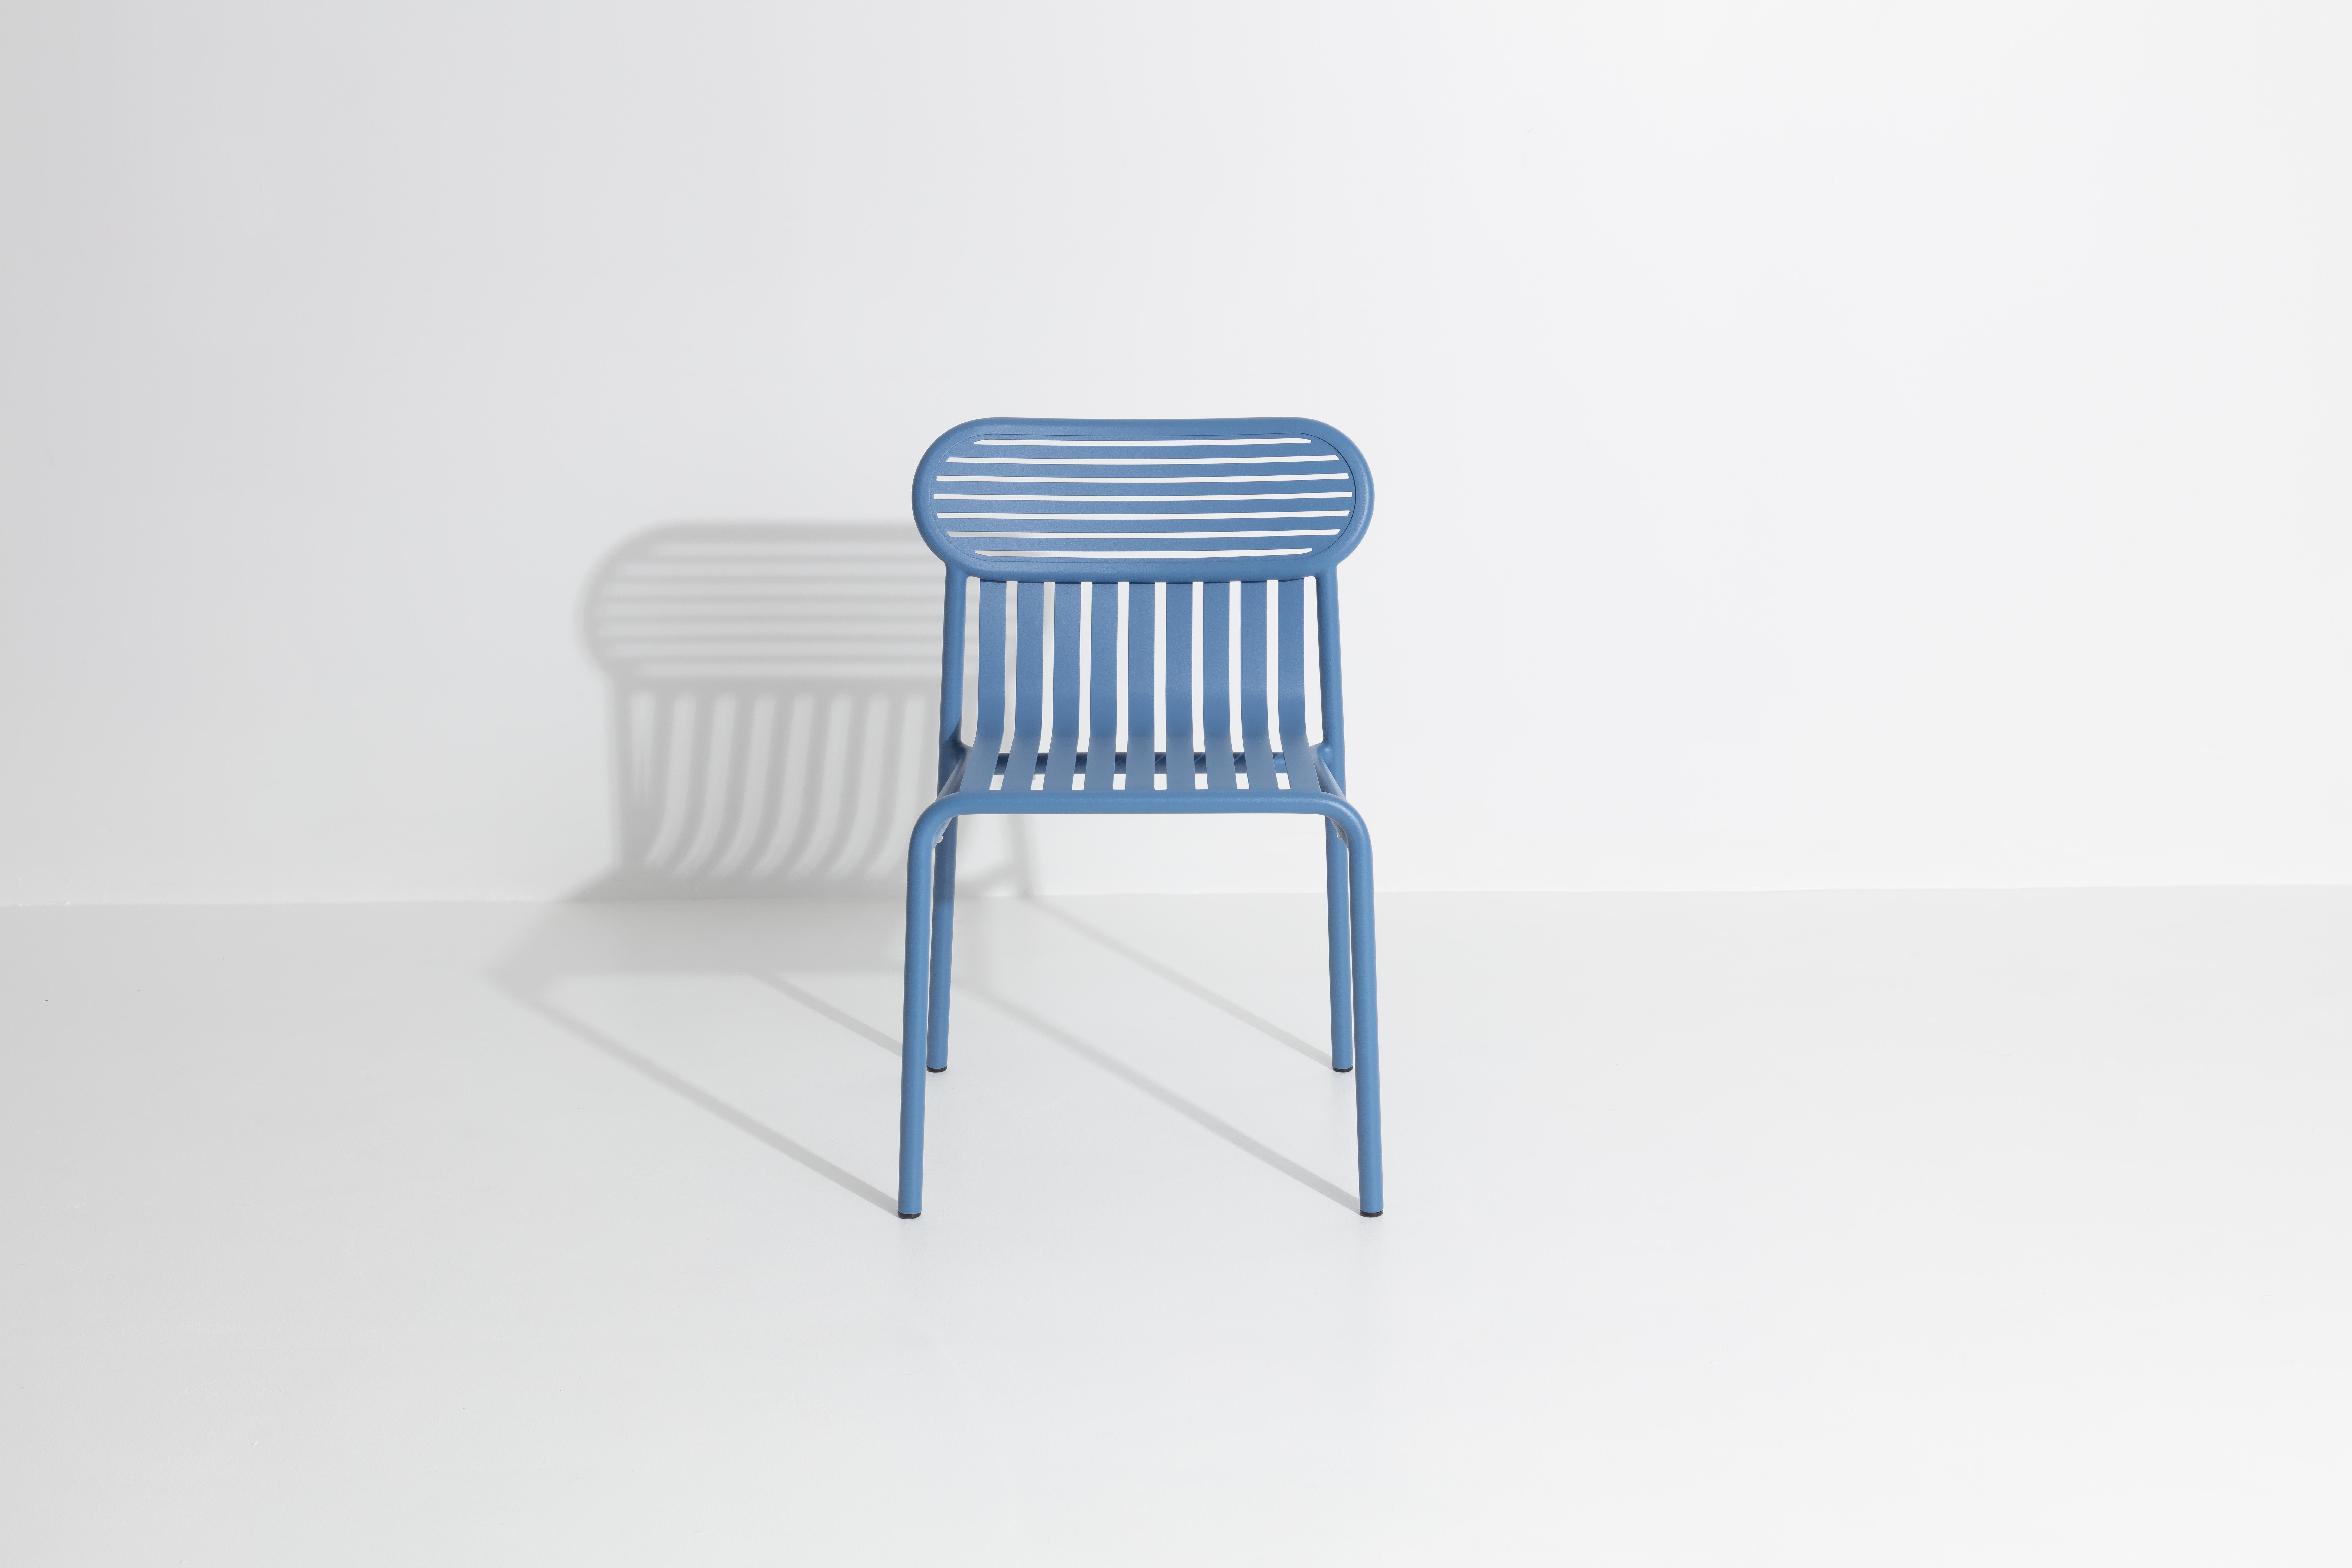 Petite Friture Week-End Chair in Azur Blue Aluminium by Studio BrichetZiegler, 2017

The week-end collection is a full range of outdoor furniture, in aluminium grained epoxy paint, matt finish, that includes 18 functions and 8 colours for the